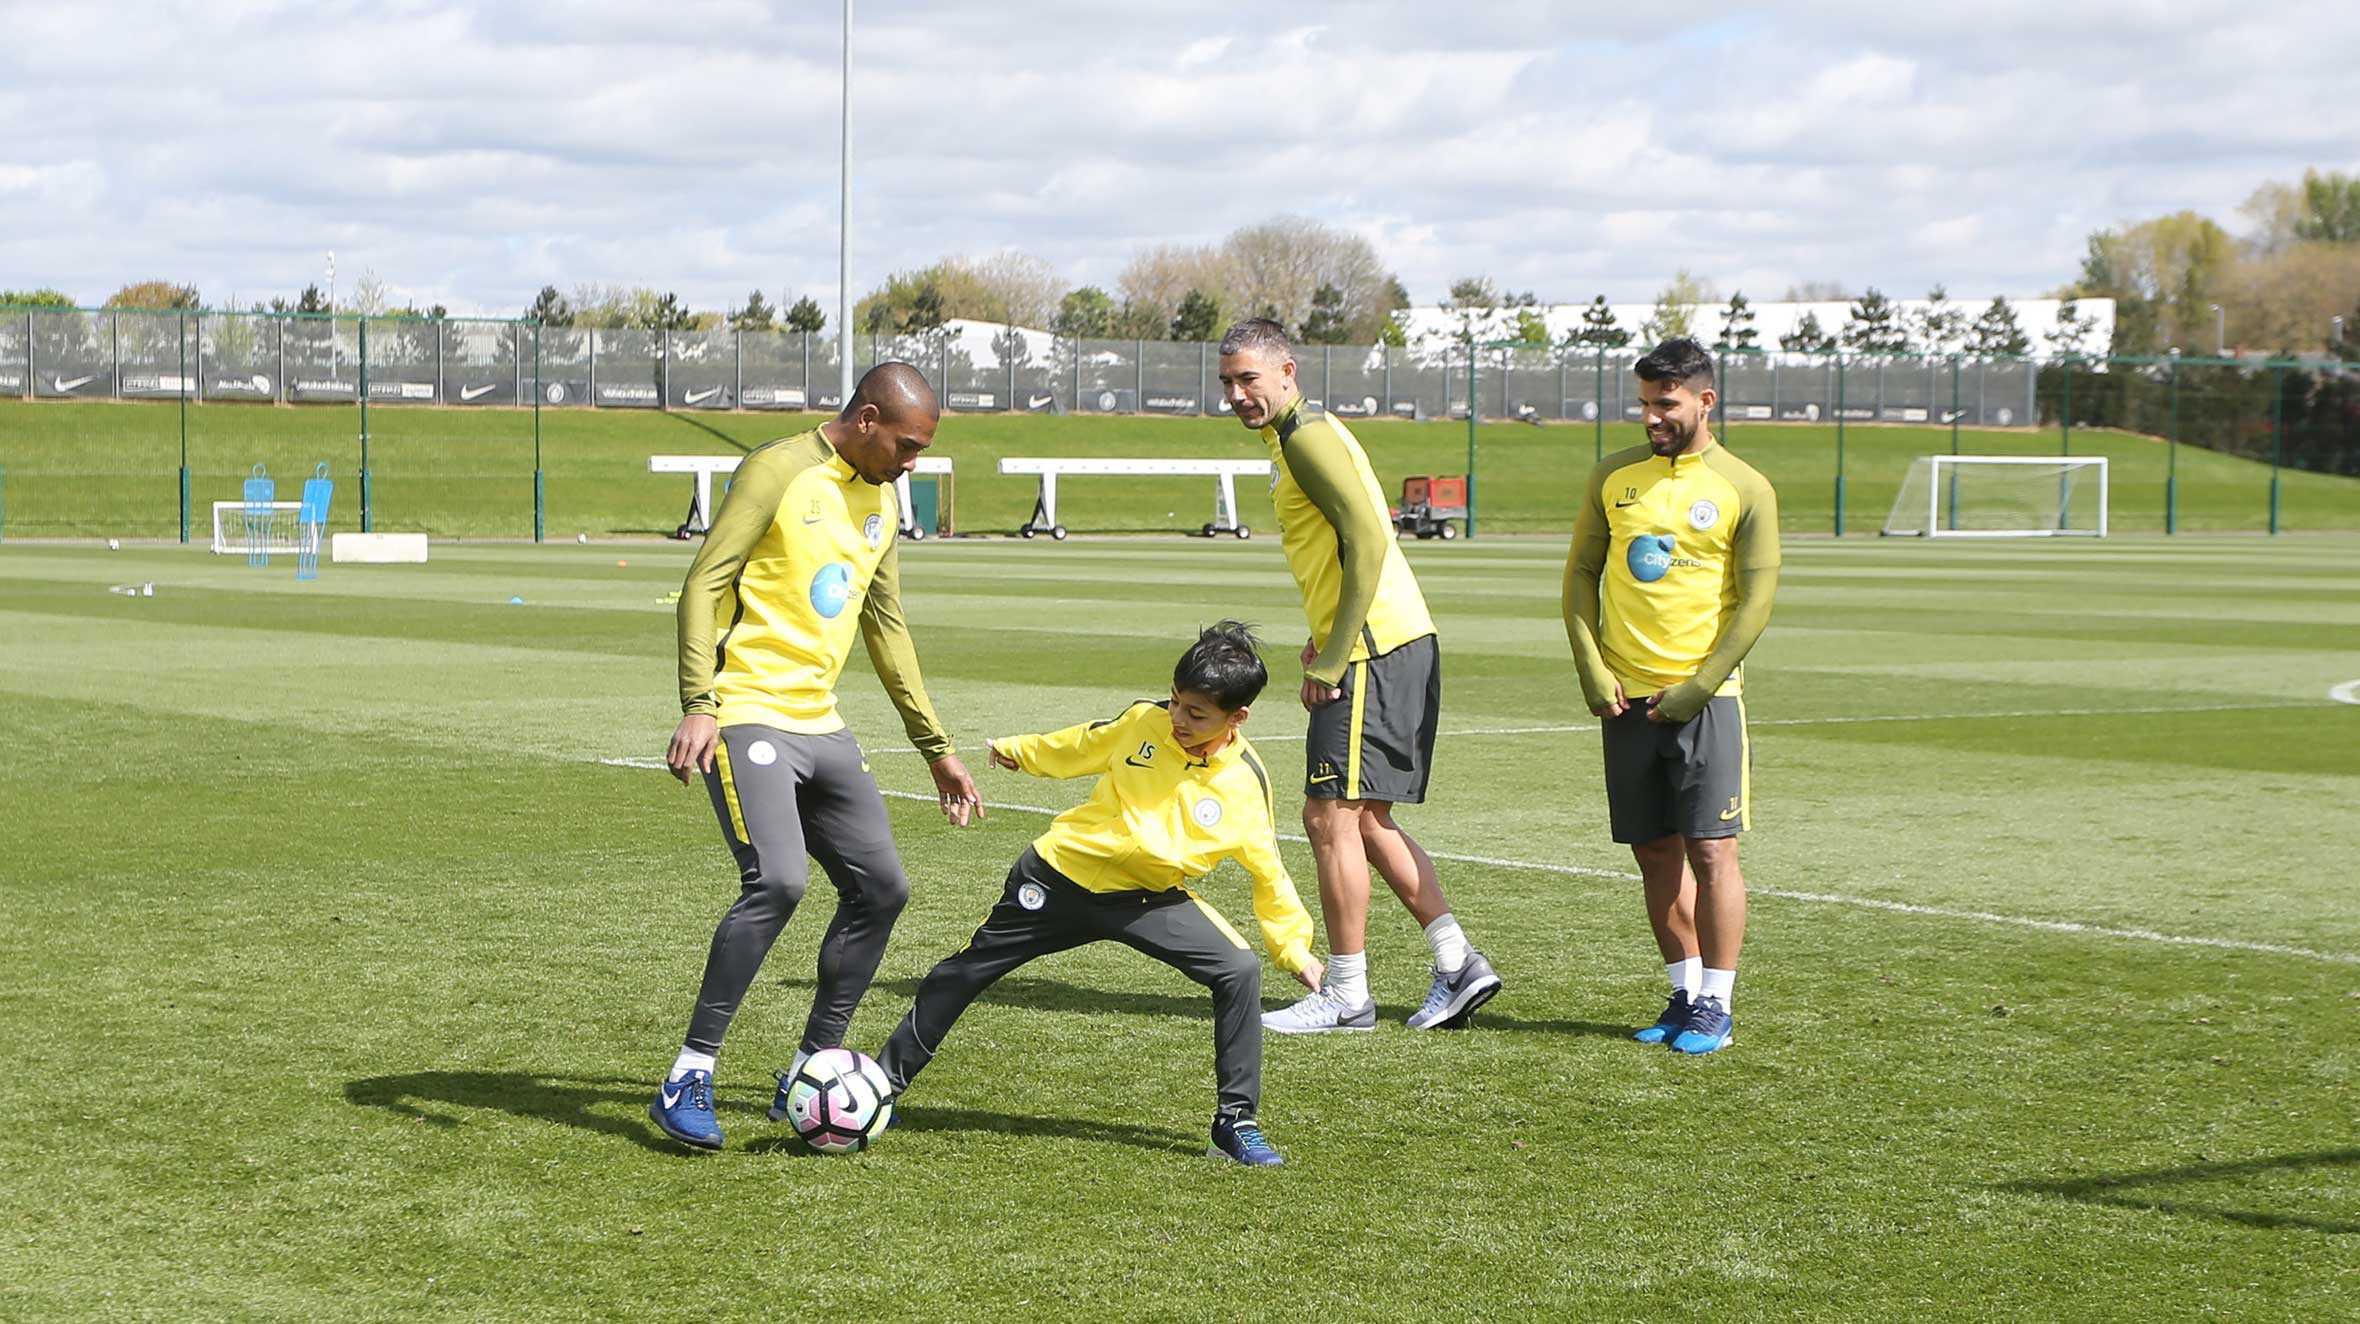 Idris playing football with some of the Man City players